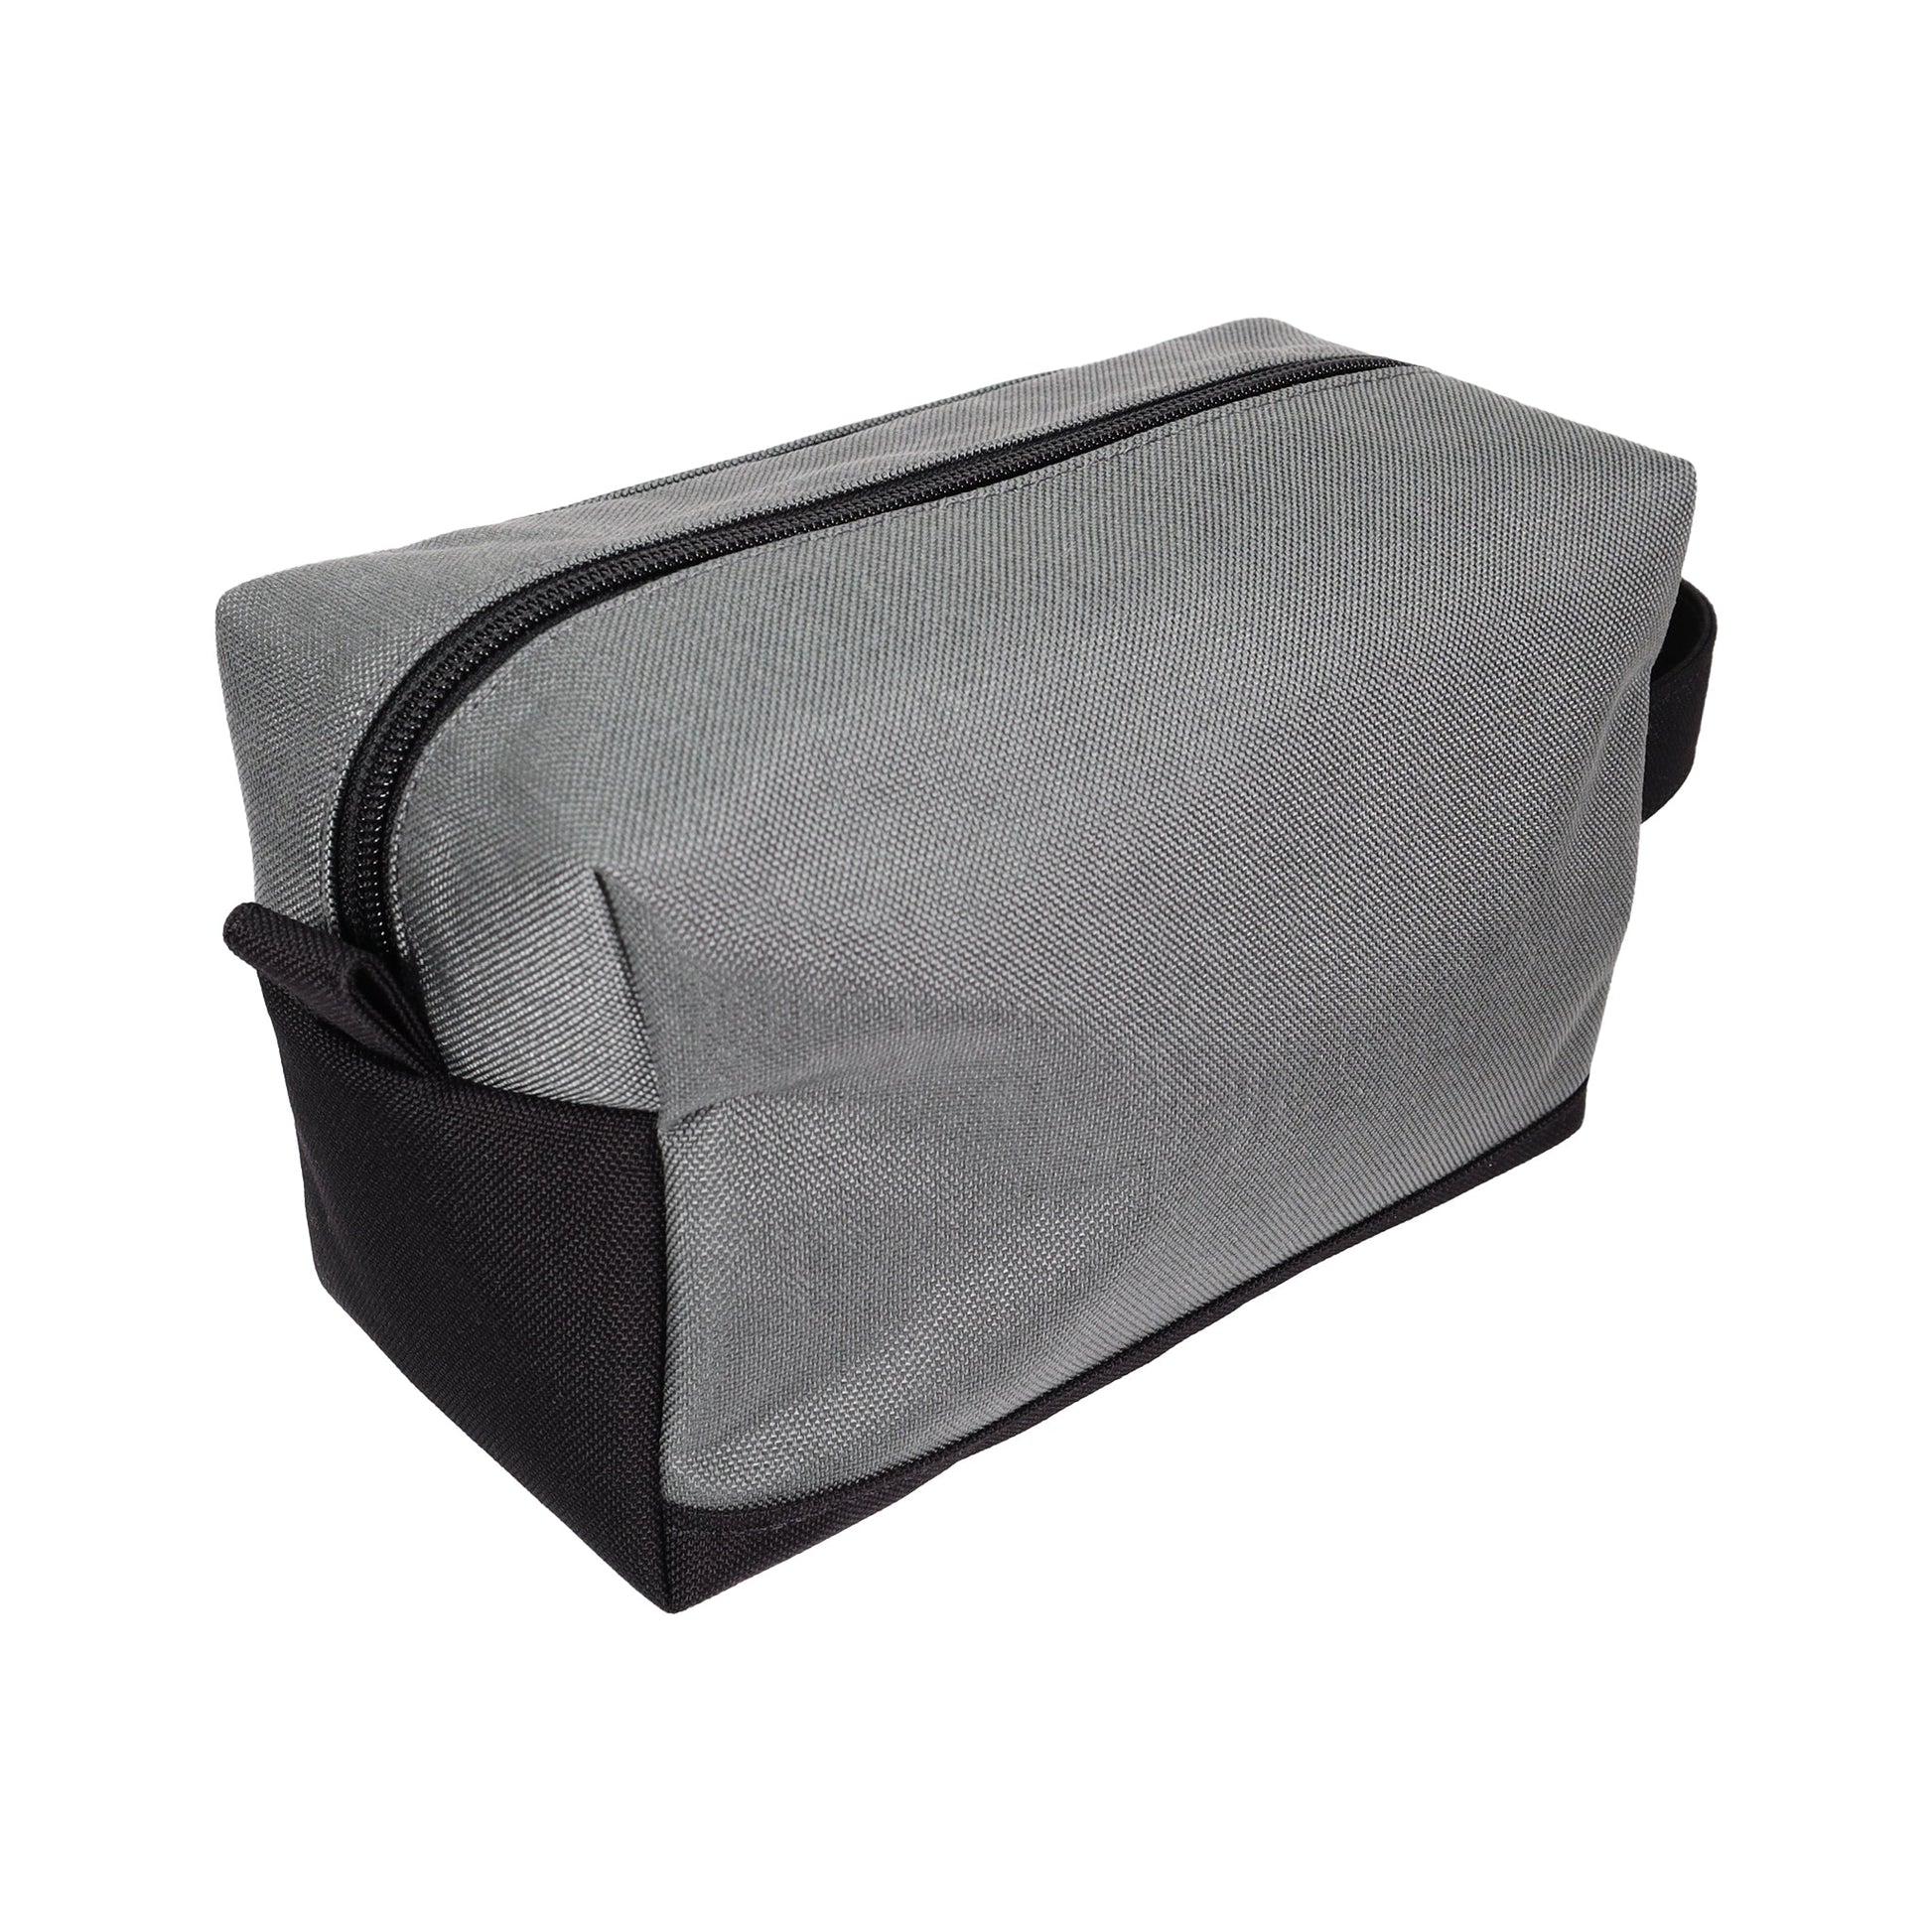 Gray and Black Tall Canvas Toiletry Bag